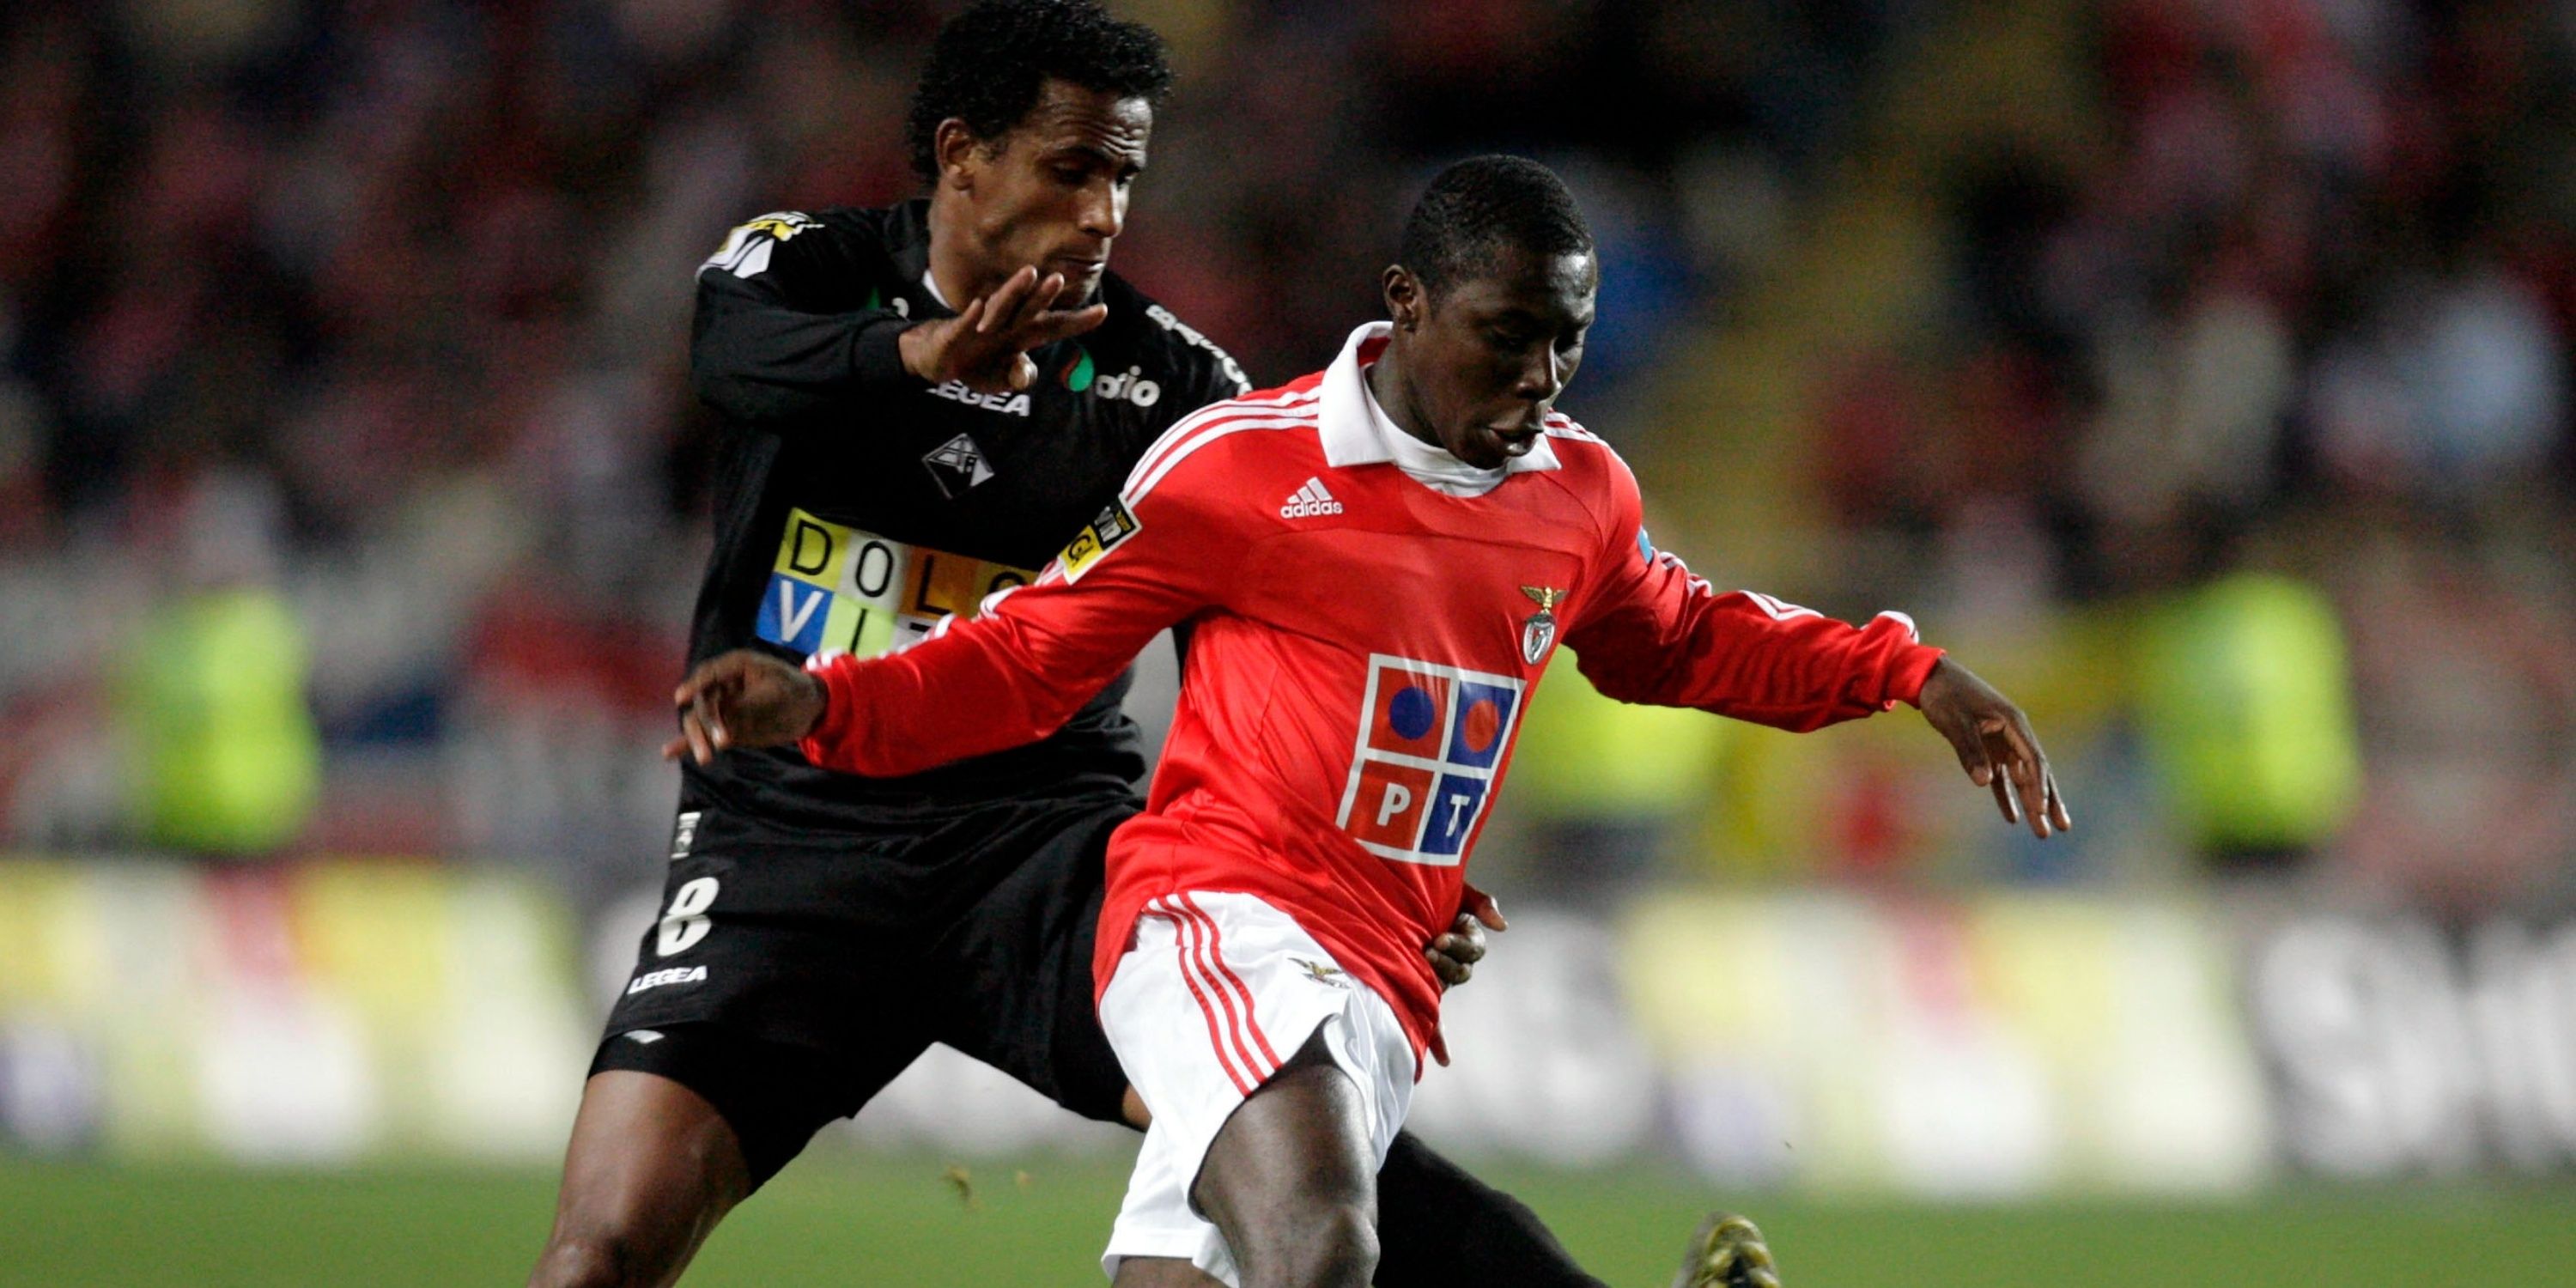 Freddy Adu in action for Benfica